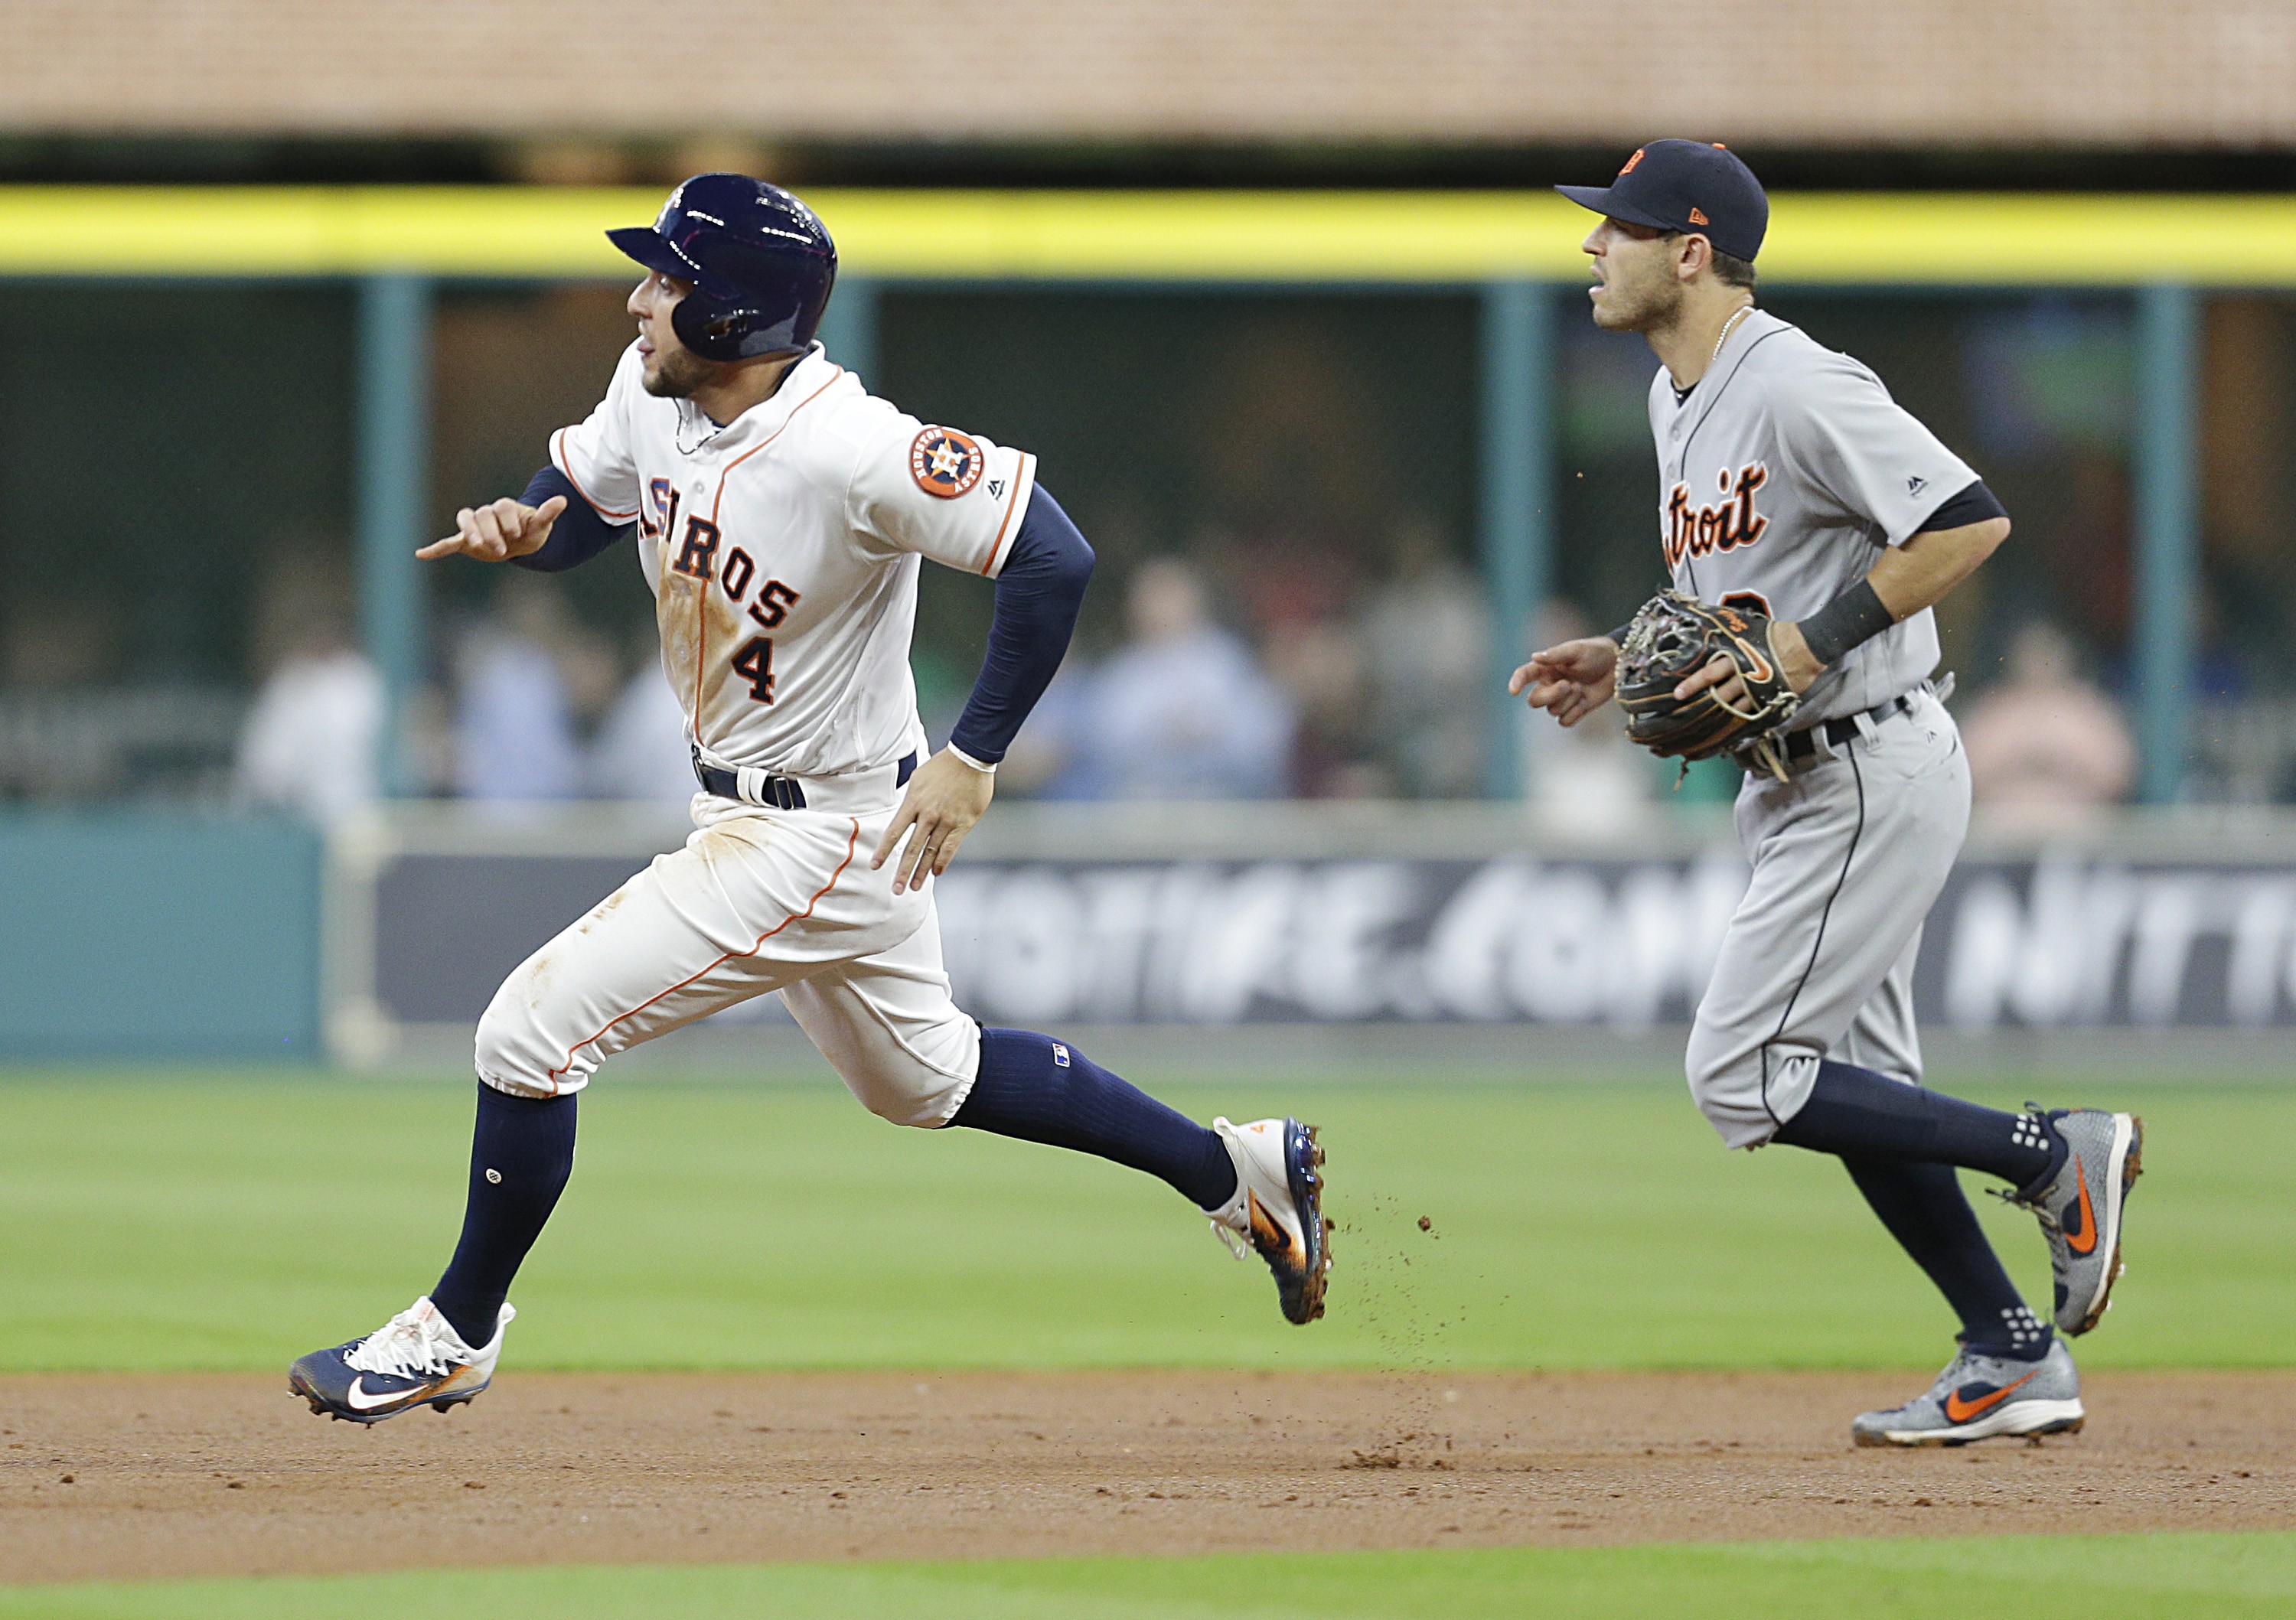 Three numbers from last night’s Astros win